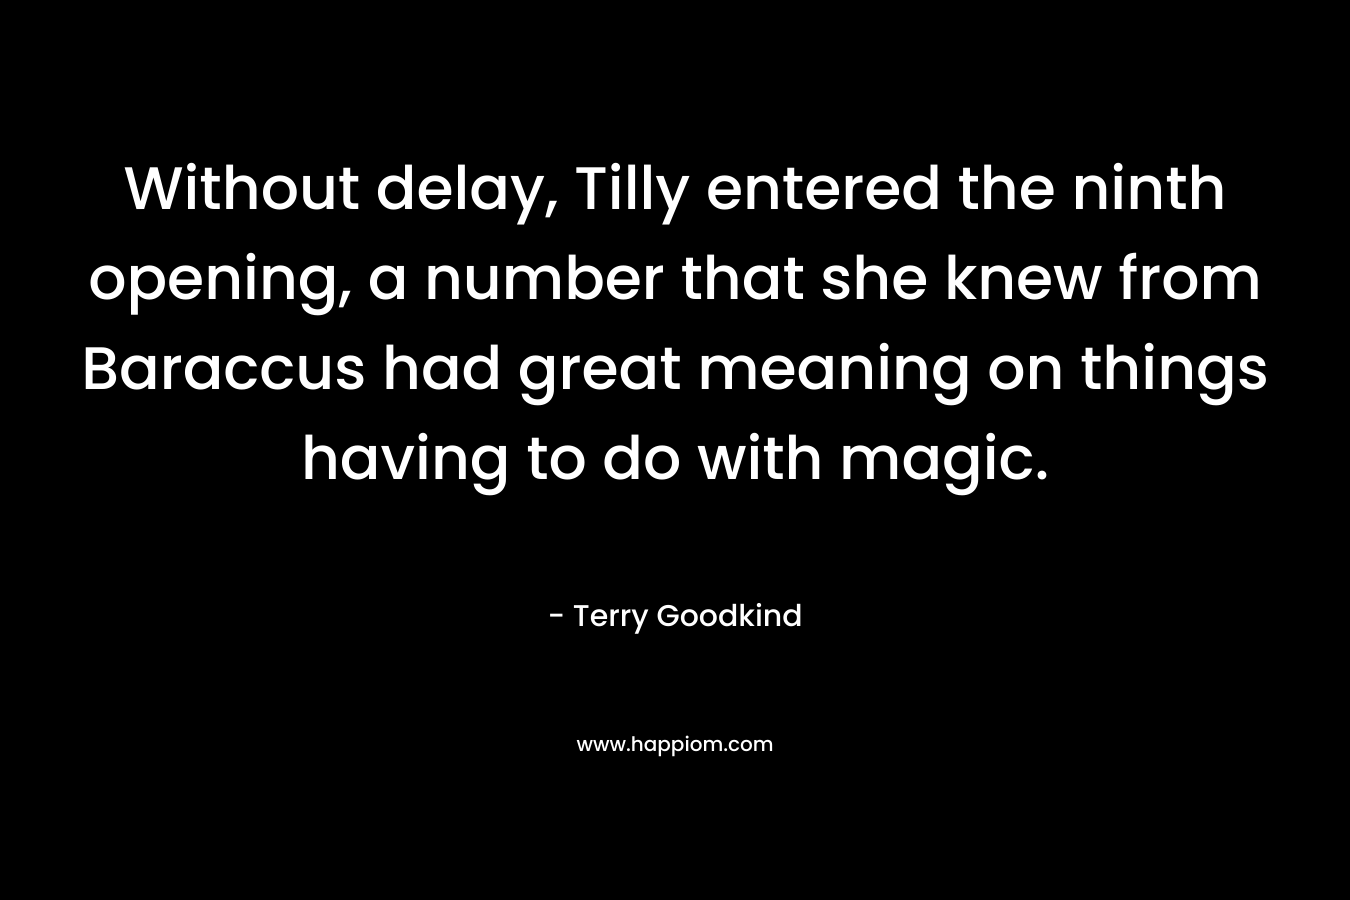 Without delay, Tilly entered the ninth opening, a number that she knew from Baraccus had great meaning on things having to do with magic. – Terry Goodkind